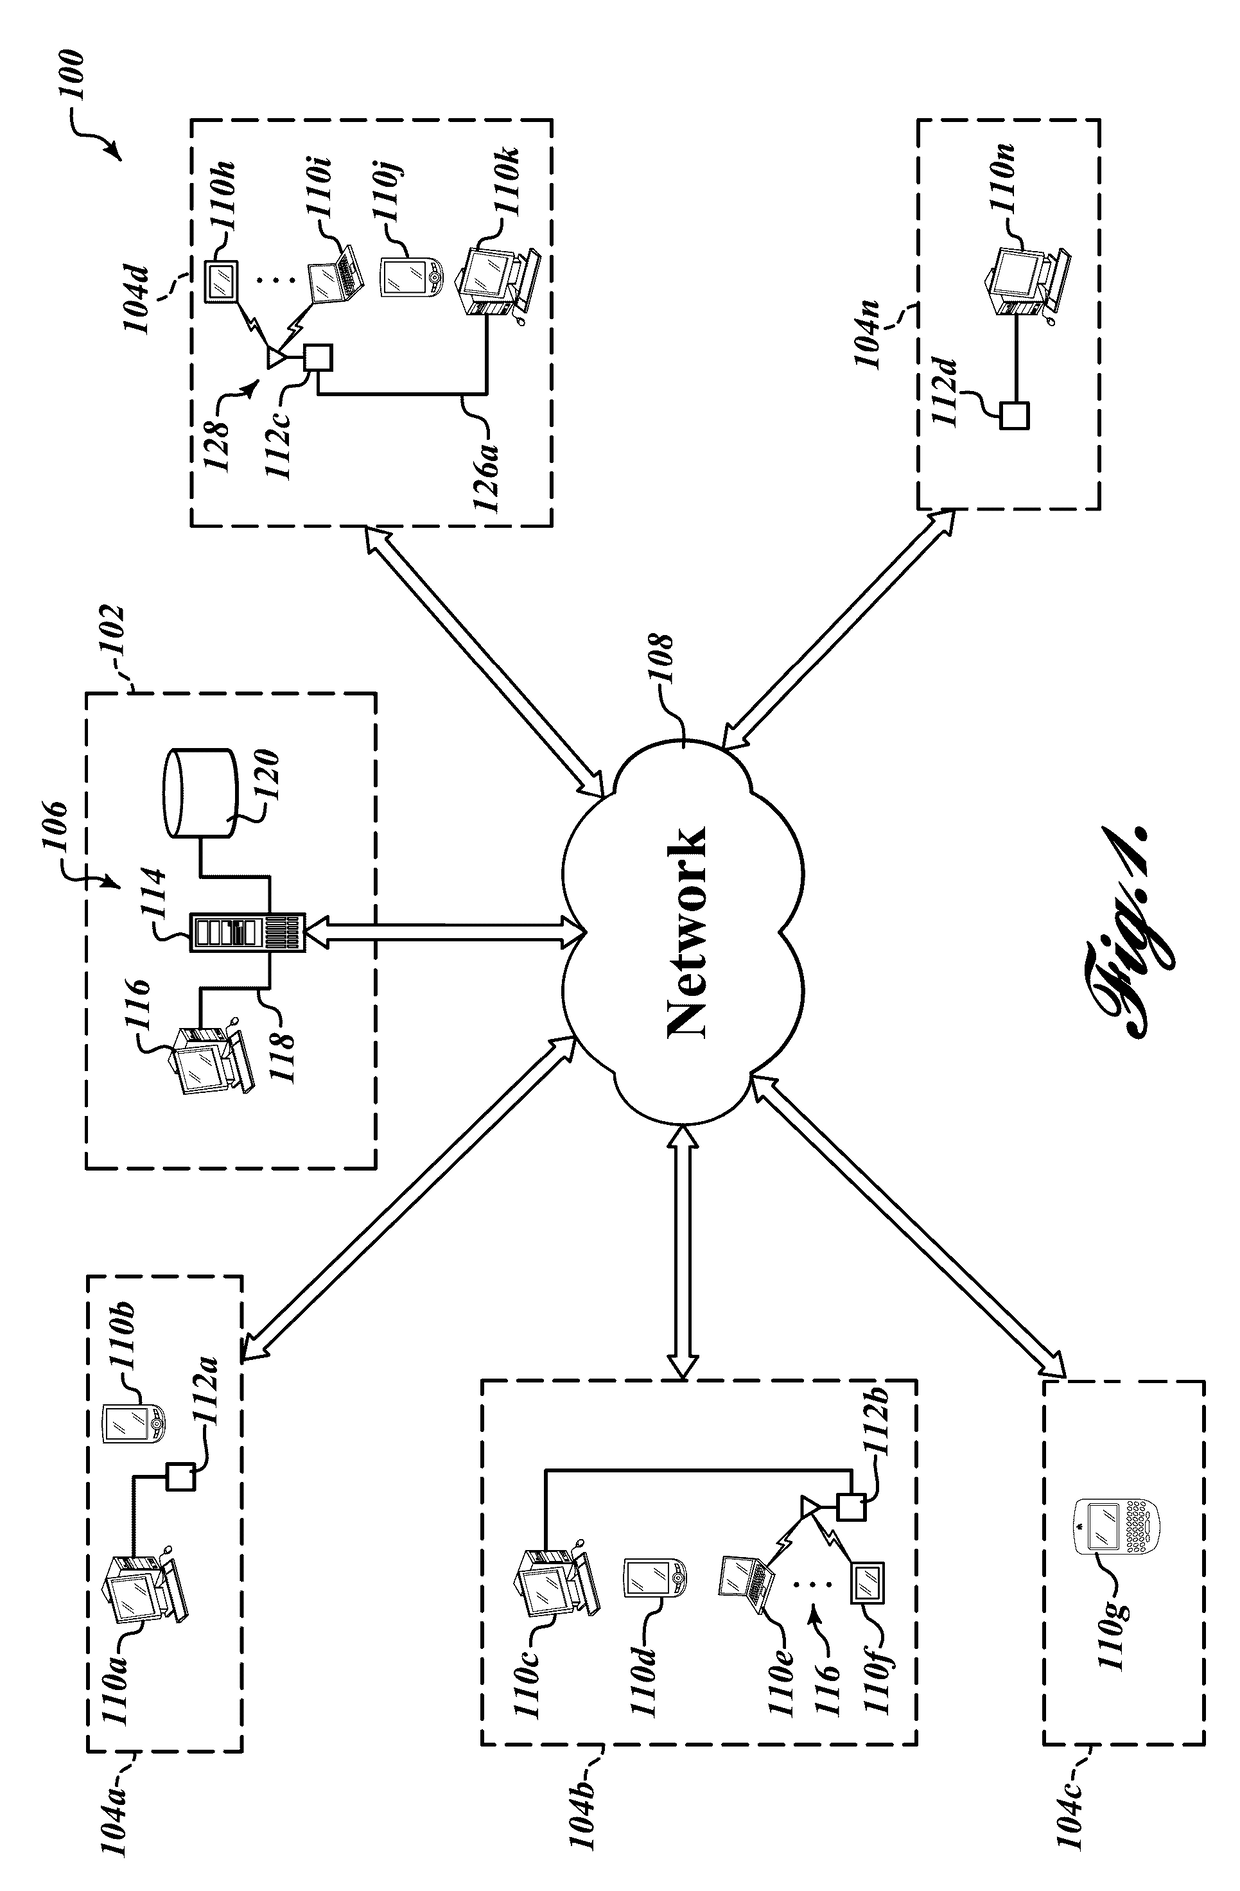 Apparatus, method and article to facilitate matching of clients in a networked environment